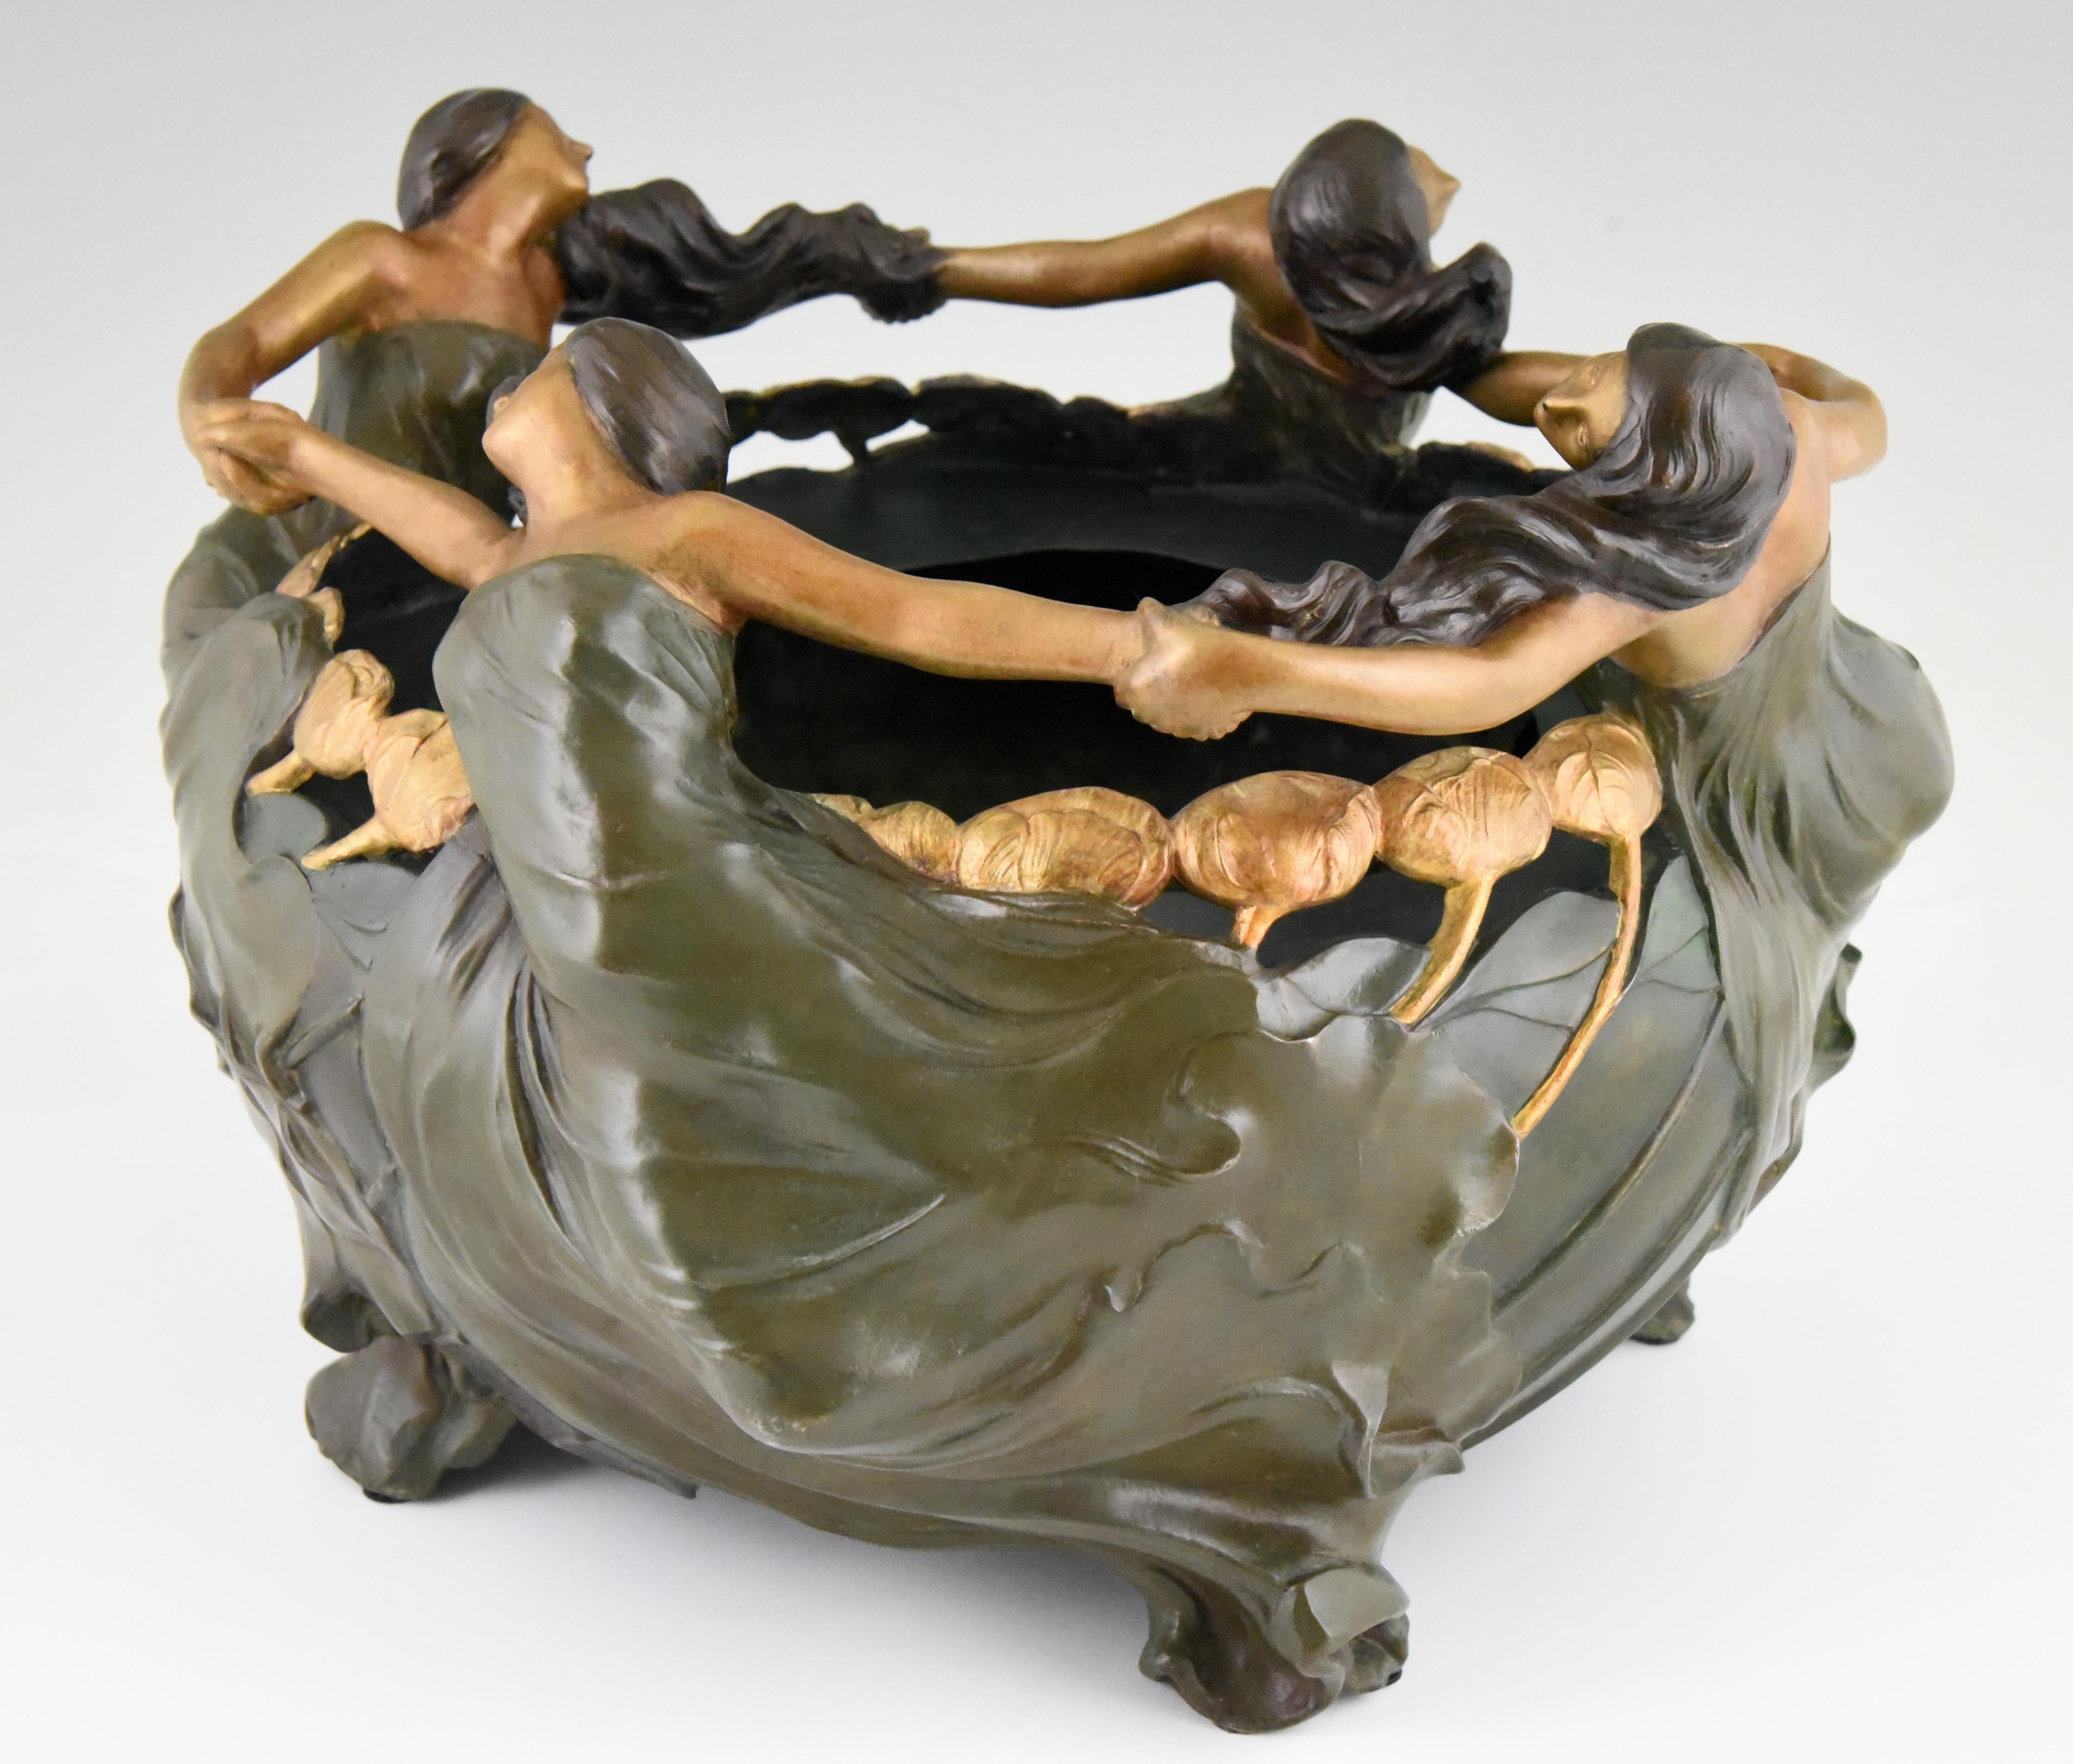 French Art Nouveau Planter with Woman and Flowers La Ronde by Maurel France, 1900